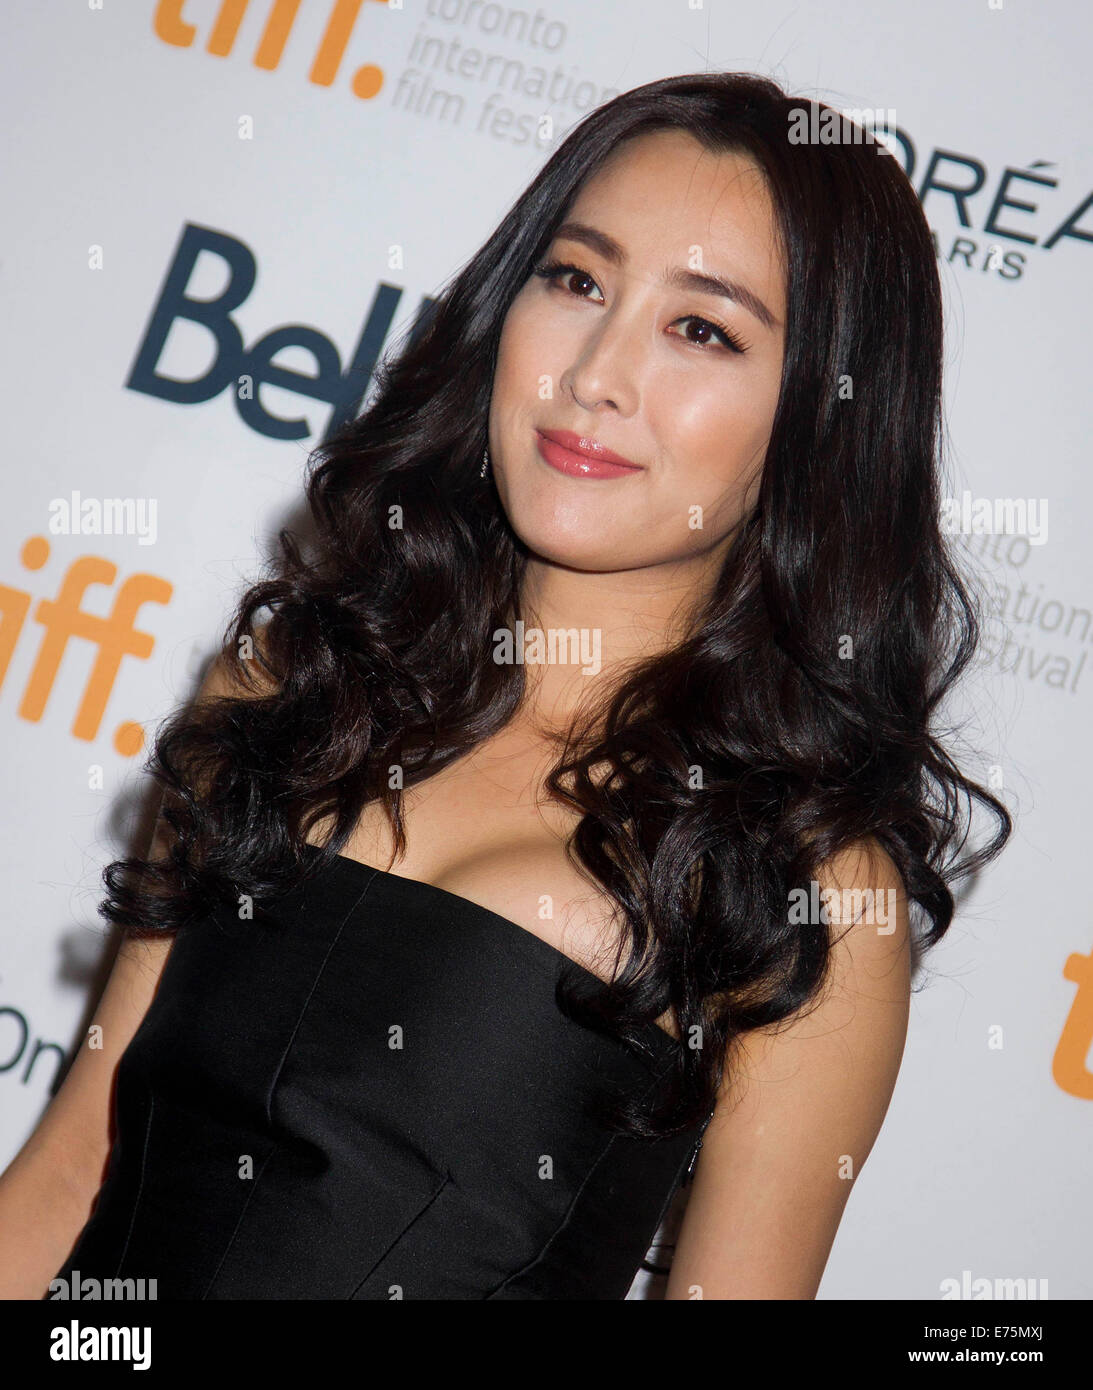 Toronto, Canada. 7th Sep, 2014. Actress Ma Su poses for photos before the premiere of the film 'Breakup Buddies' at Princess of Wales Theatre during the 39th Toronto International Film Festival in Toronto, Canada, Sept. 7, 2014. Credit:  Zou Zheng/Xinhua/Alamy Live News Stock Photo